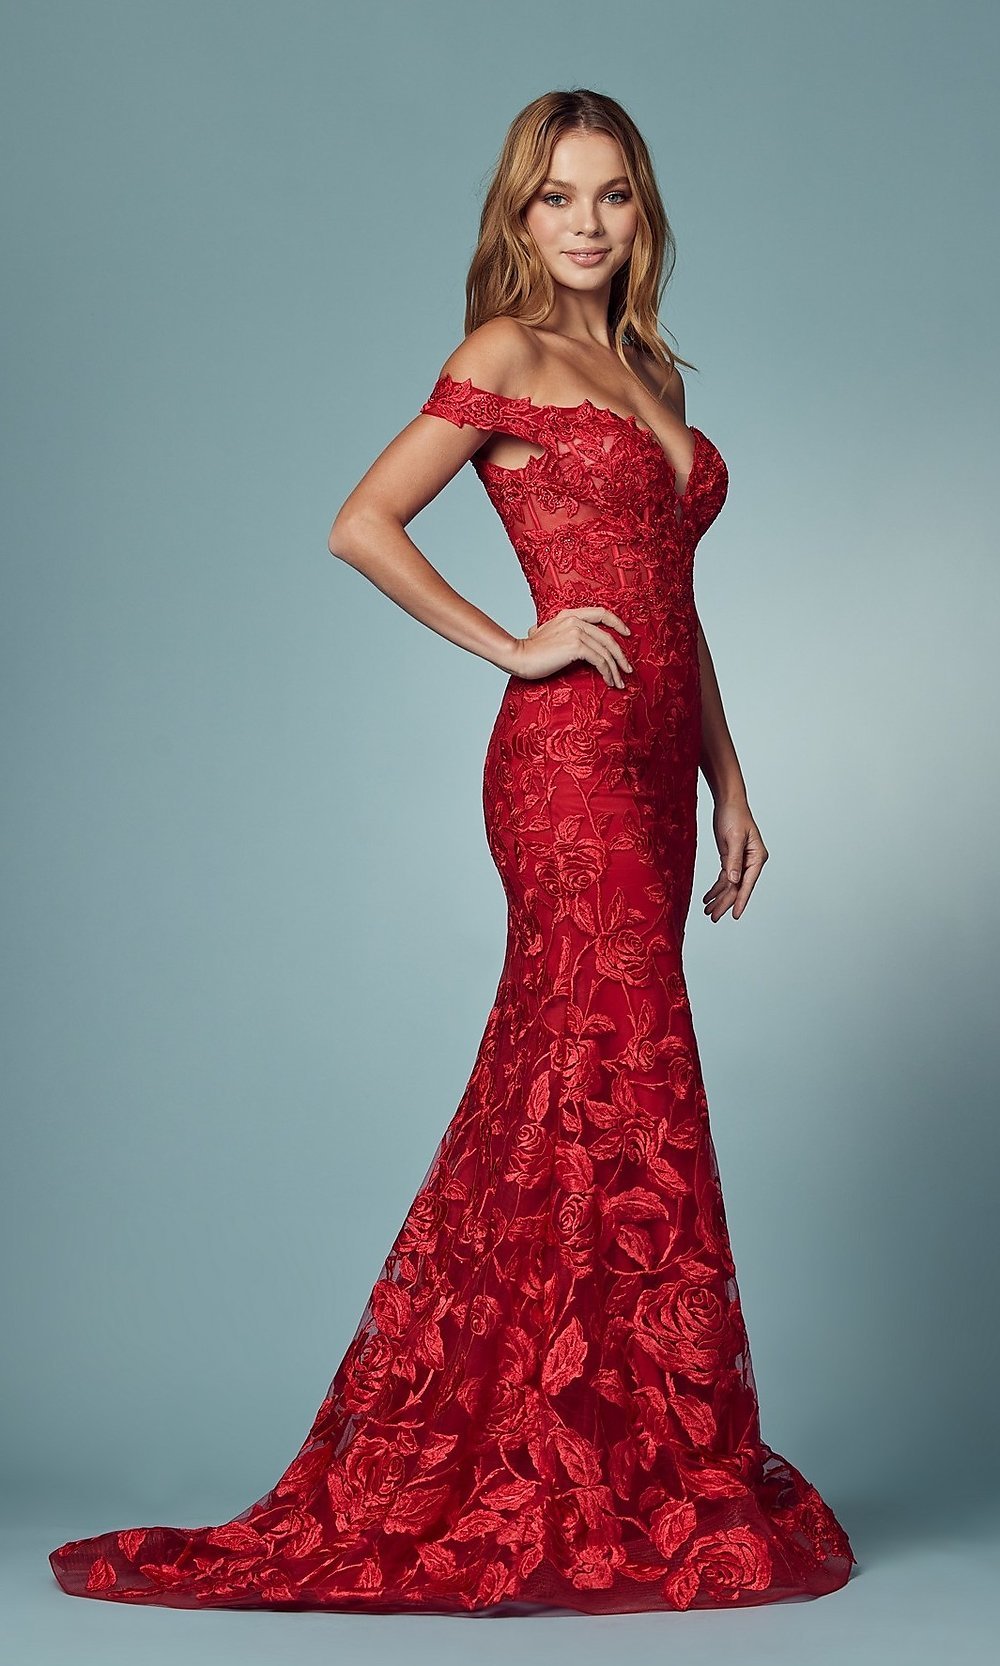 Narianna-Off-the-Shoulder Long Red Formal Prom Dress